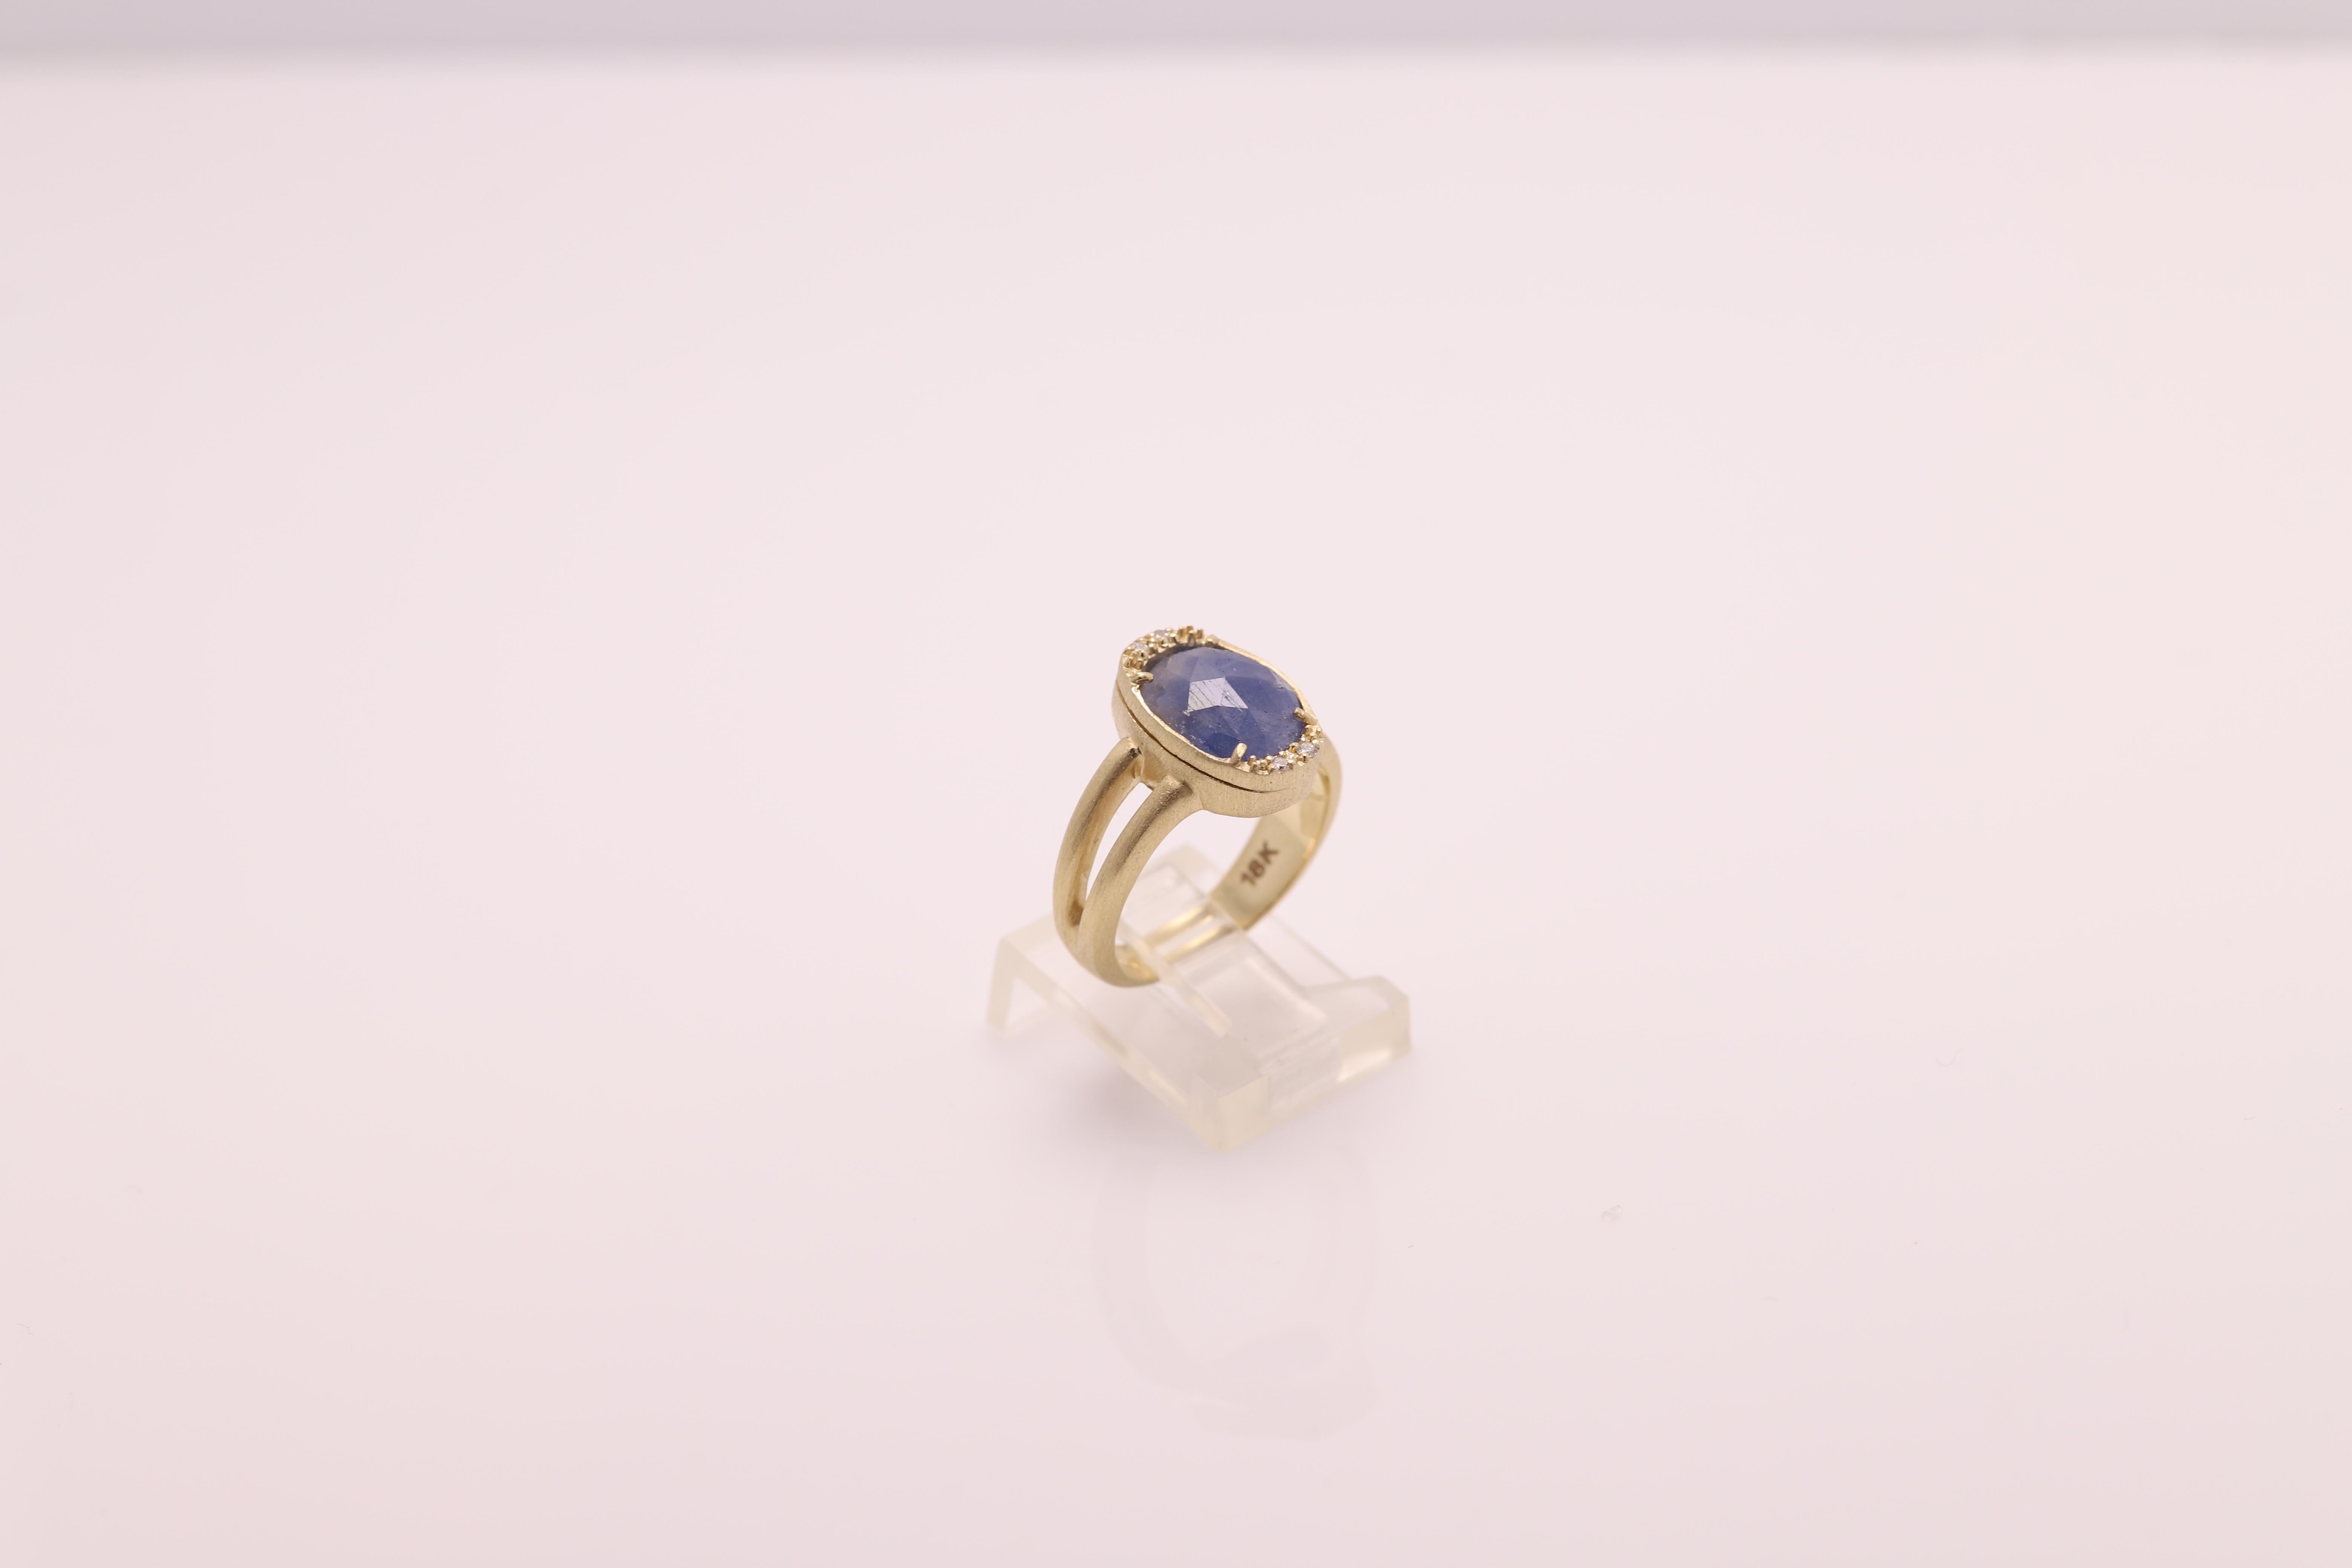 Vintage Blue Sapphire Ring - Hand Made in Italy
14k Yellow Gold 7.1 grams - mat finish (not shiny)
Few small Diamonds 0.06 carat
Center is a 